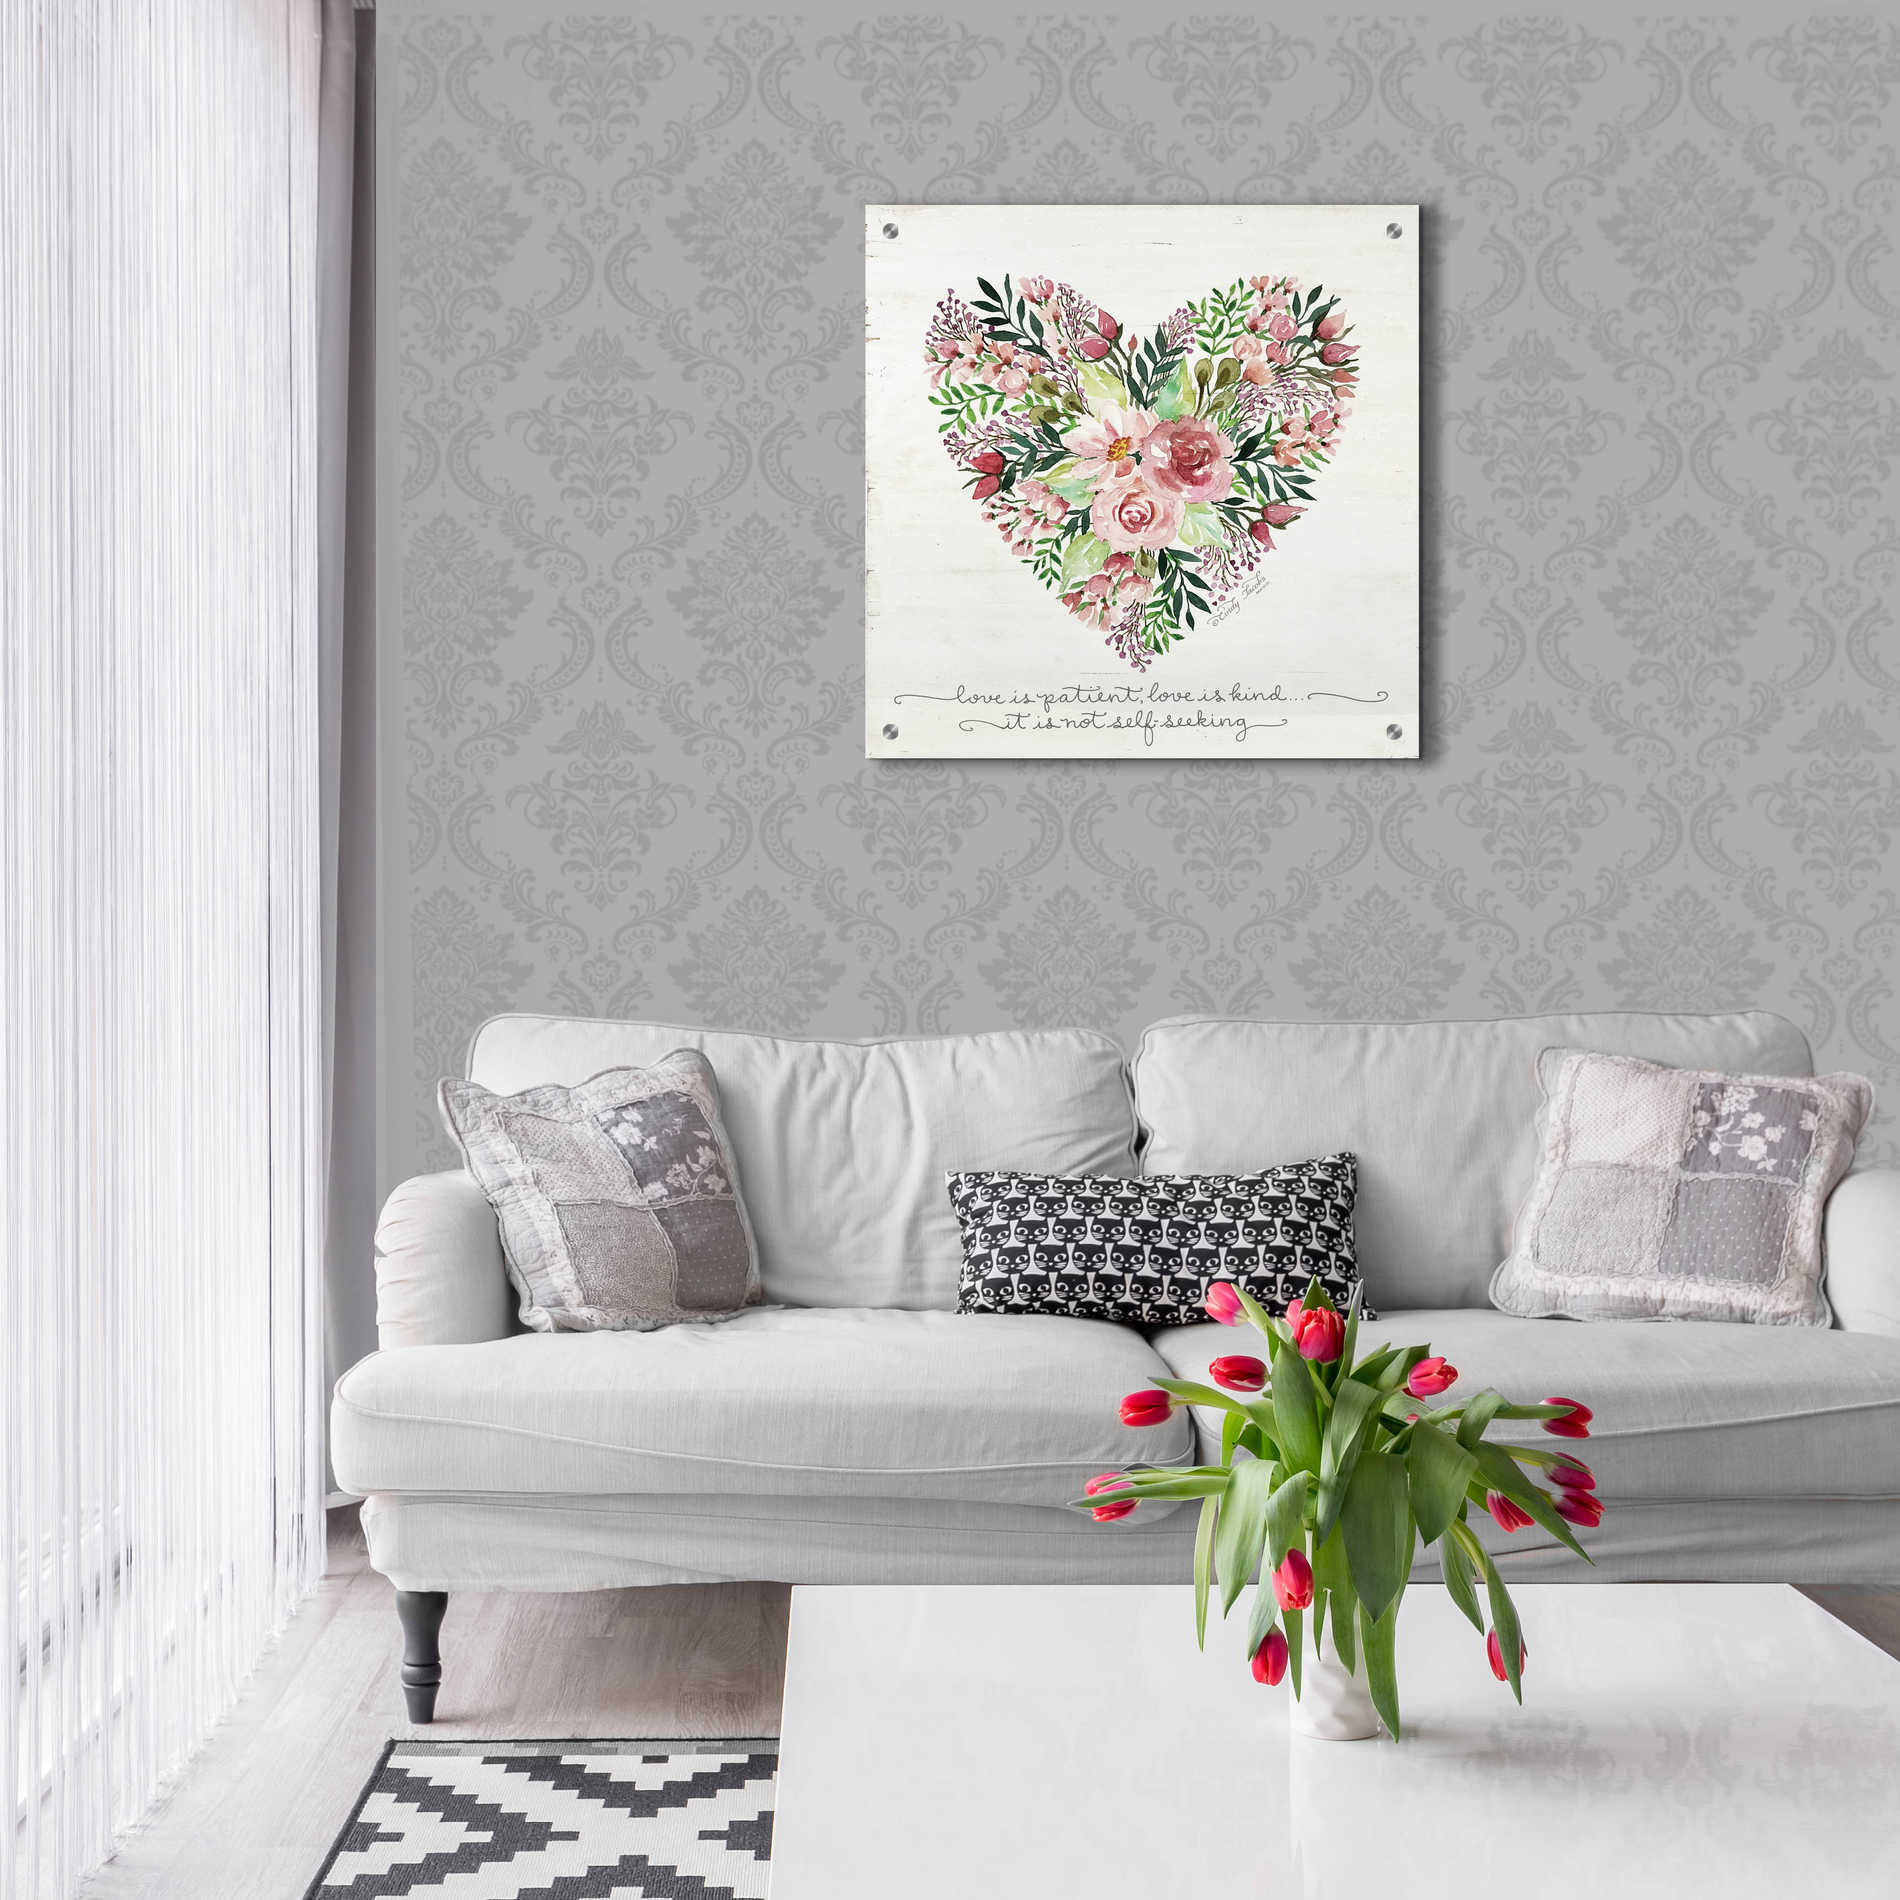 Epic Art 'Love is Patient Flower Heart' by Cindy Jacobs, Acrylic Glass Wall Art,24x24